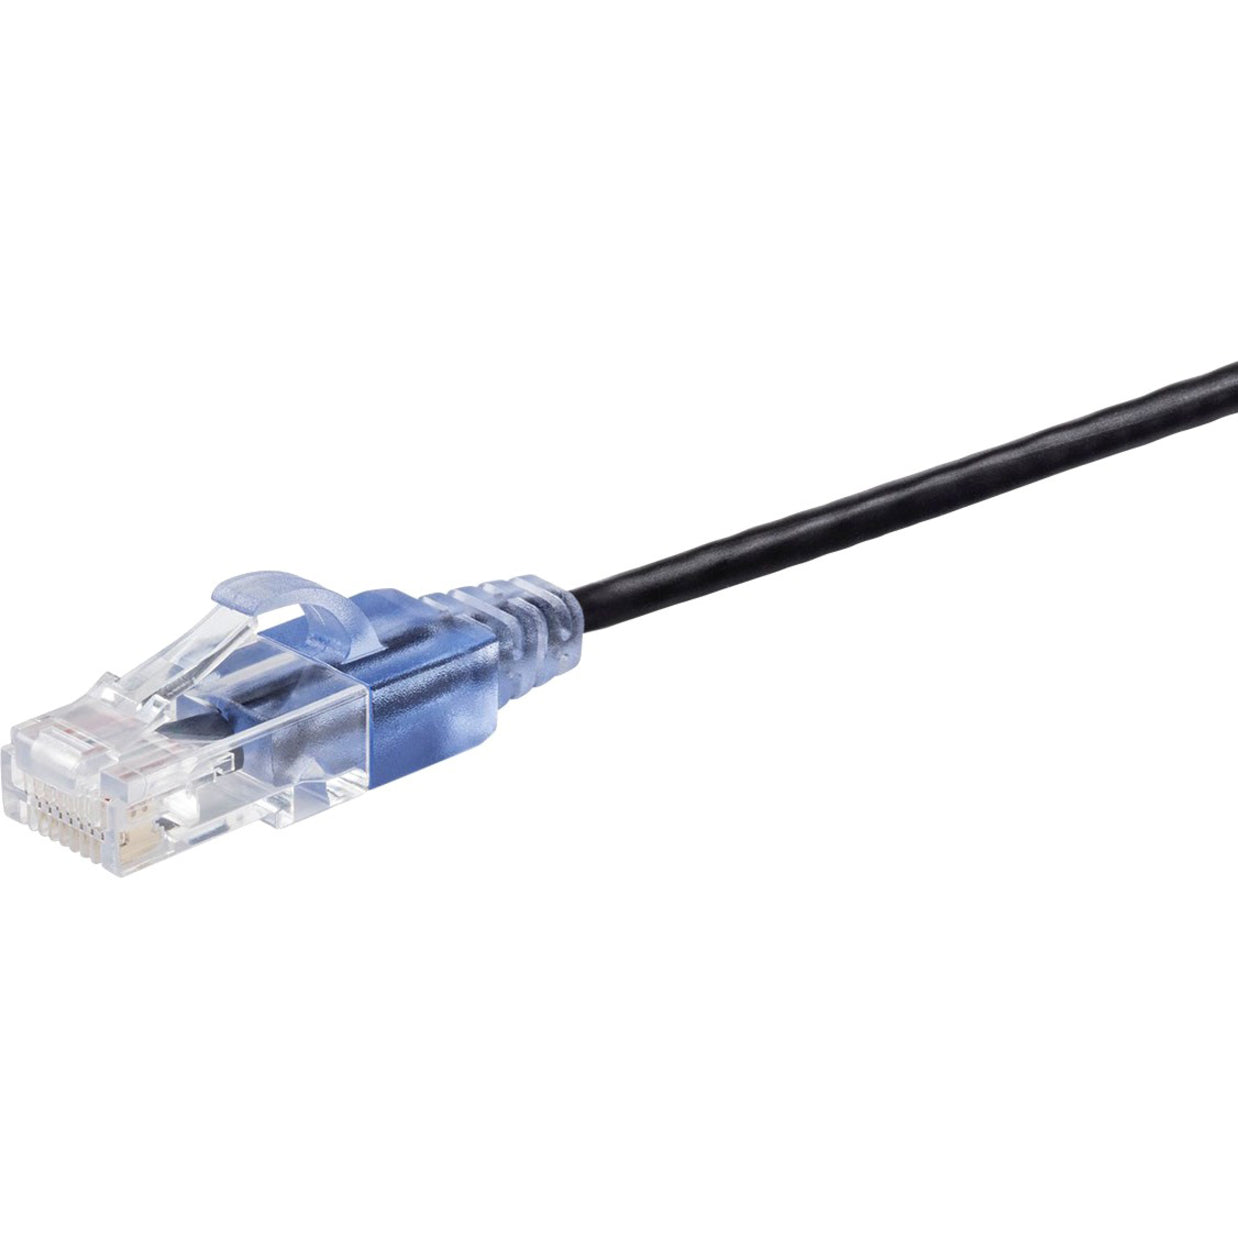 Monoprice 15169 SlimRun Cat6A Ethernet Network Patch Cable 14ft Black, 10-Pack